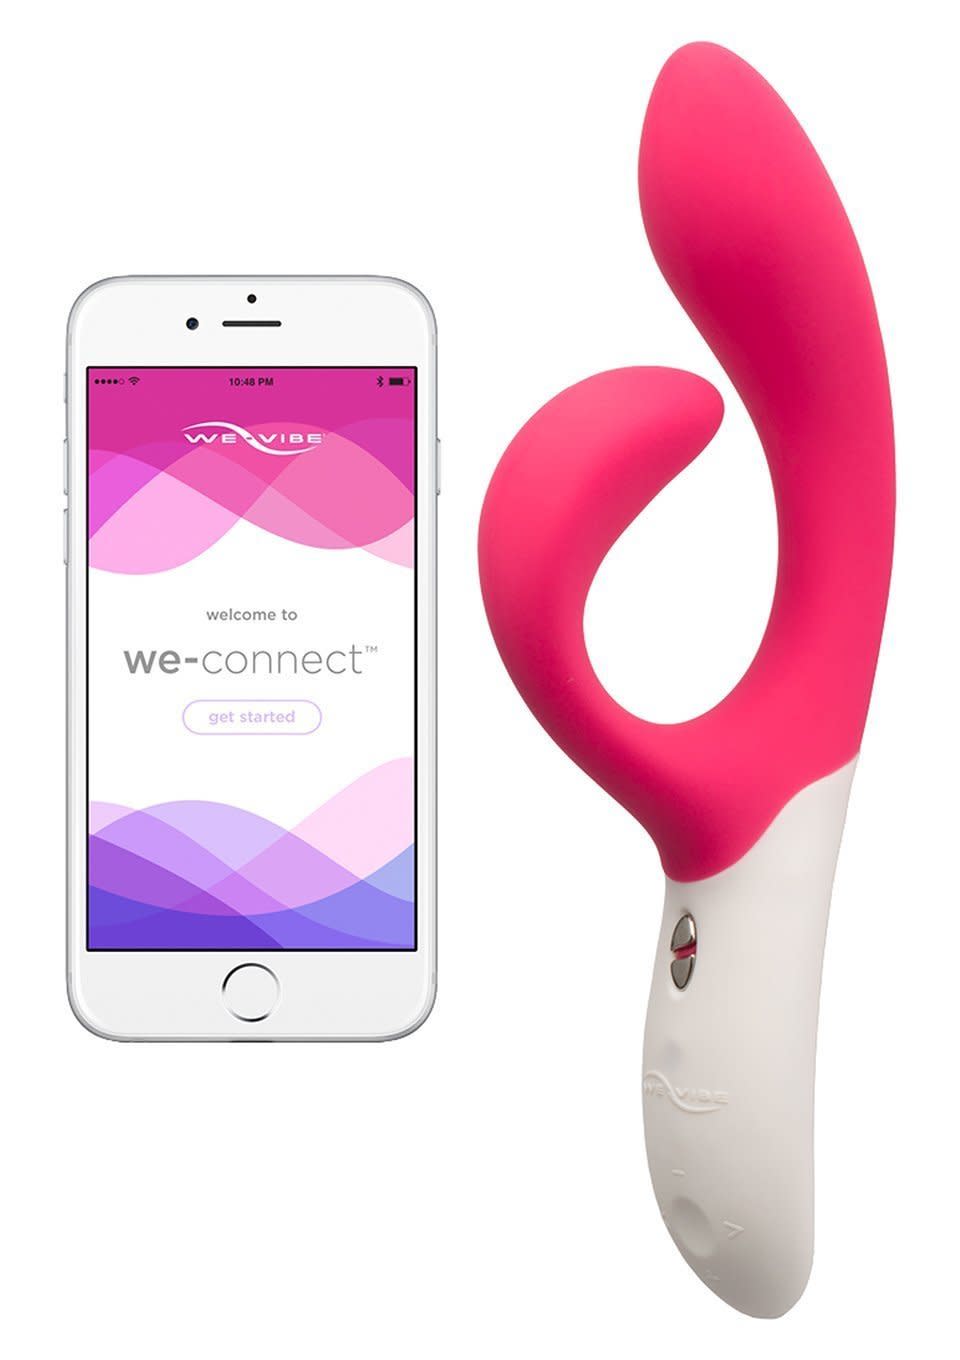 "<a href="https://www.amazon.com/We-Vibe-Nova-Dual-Stimulator-Pink/dp/B01AS286K0" target="_blank">Nova by We-Vibe</a> is a vibrator contoured to provide clitoral and G-spot stimulation. It is a modern version of The Rabbit with a clitoral stimulator that flexes and moves with your body. I recommended this device if you're looking for multisensory orgasms." --&nbsp;<i><a href="http://drshannonchavez.com/" target="_blank">Shannon Chavez</a>, a psychologist and sex therapist in Los Angeles</i>